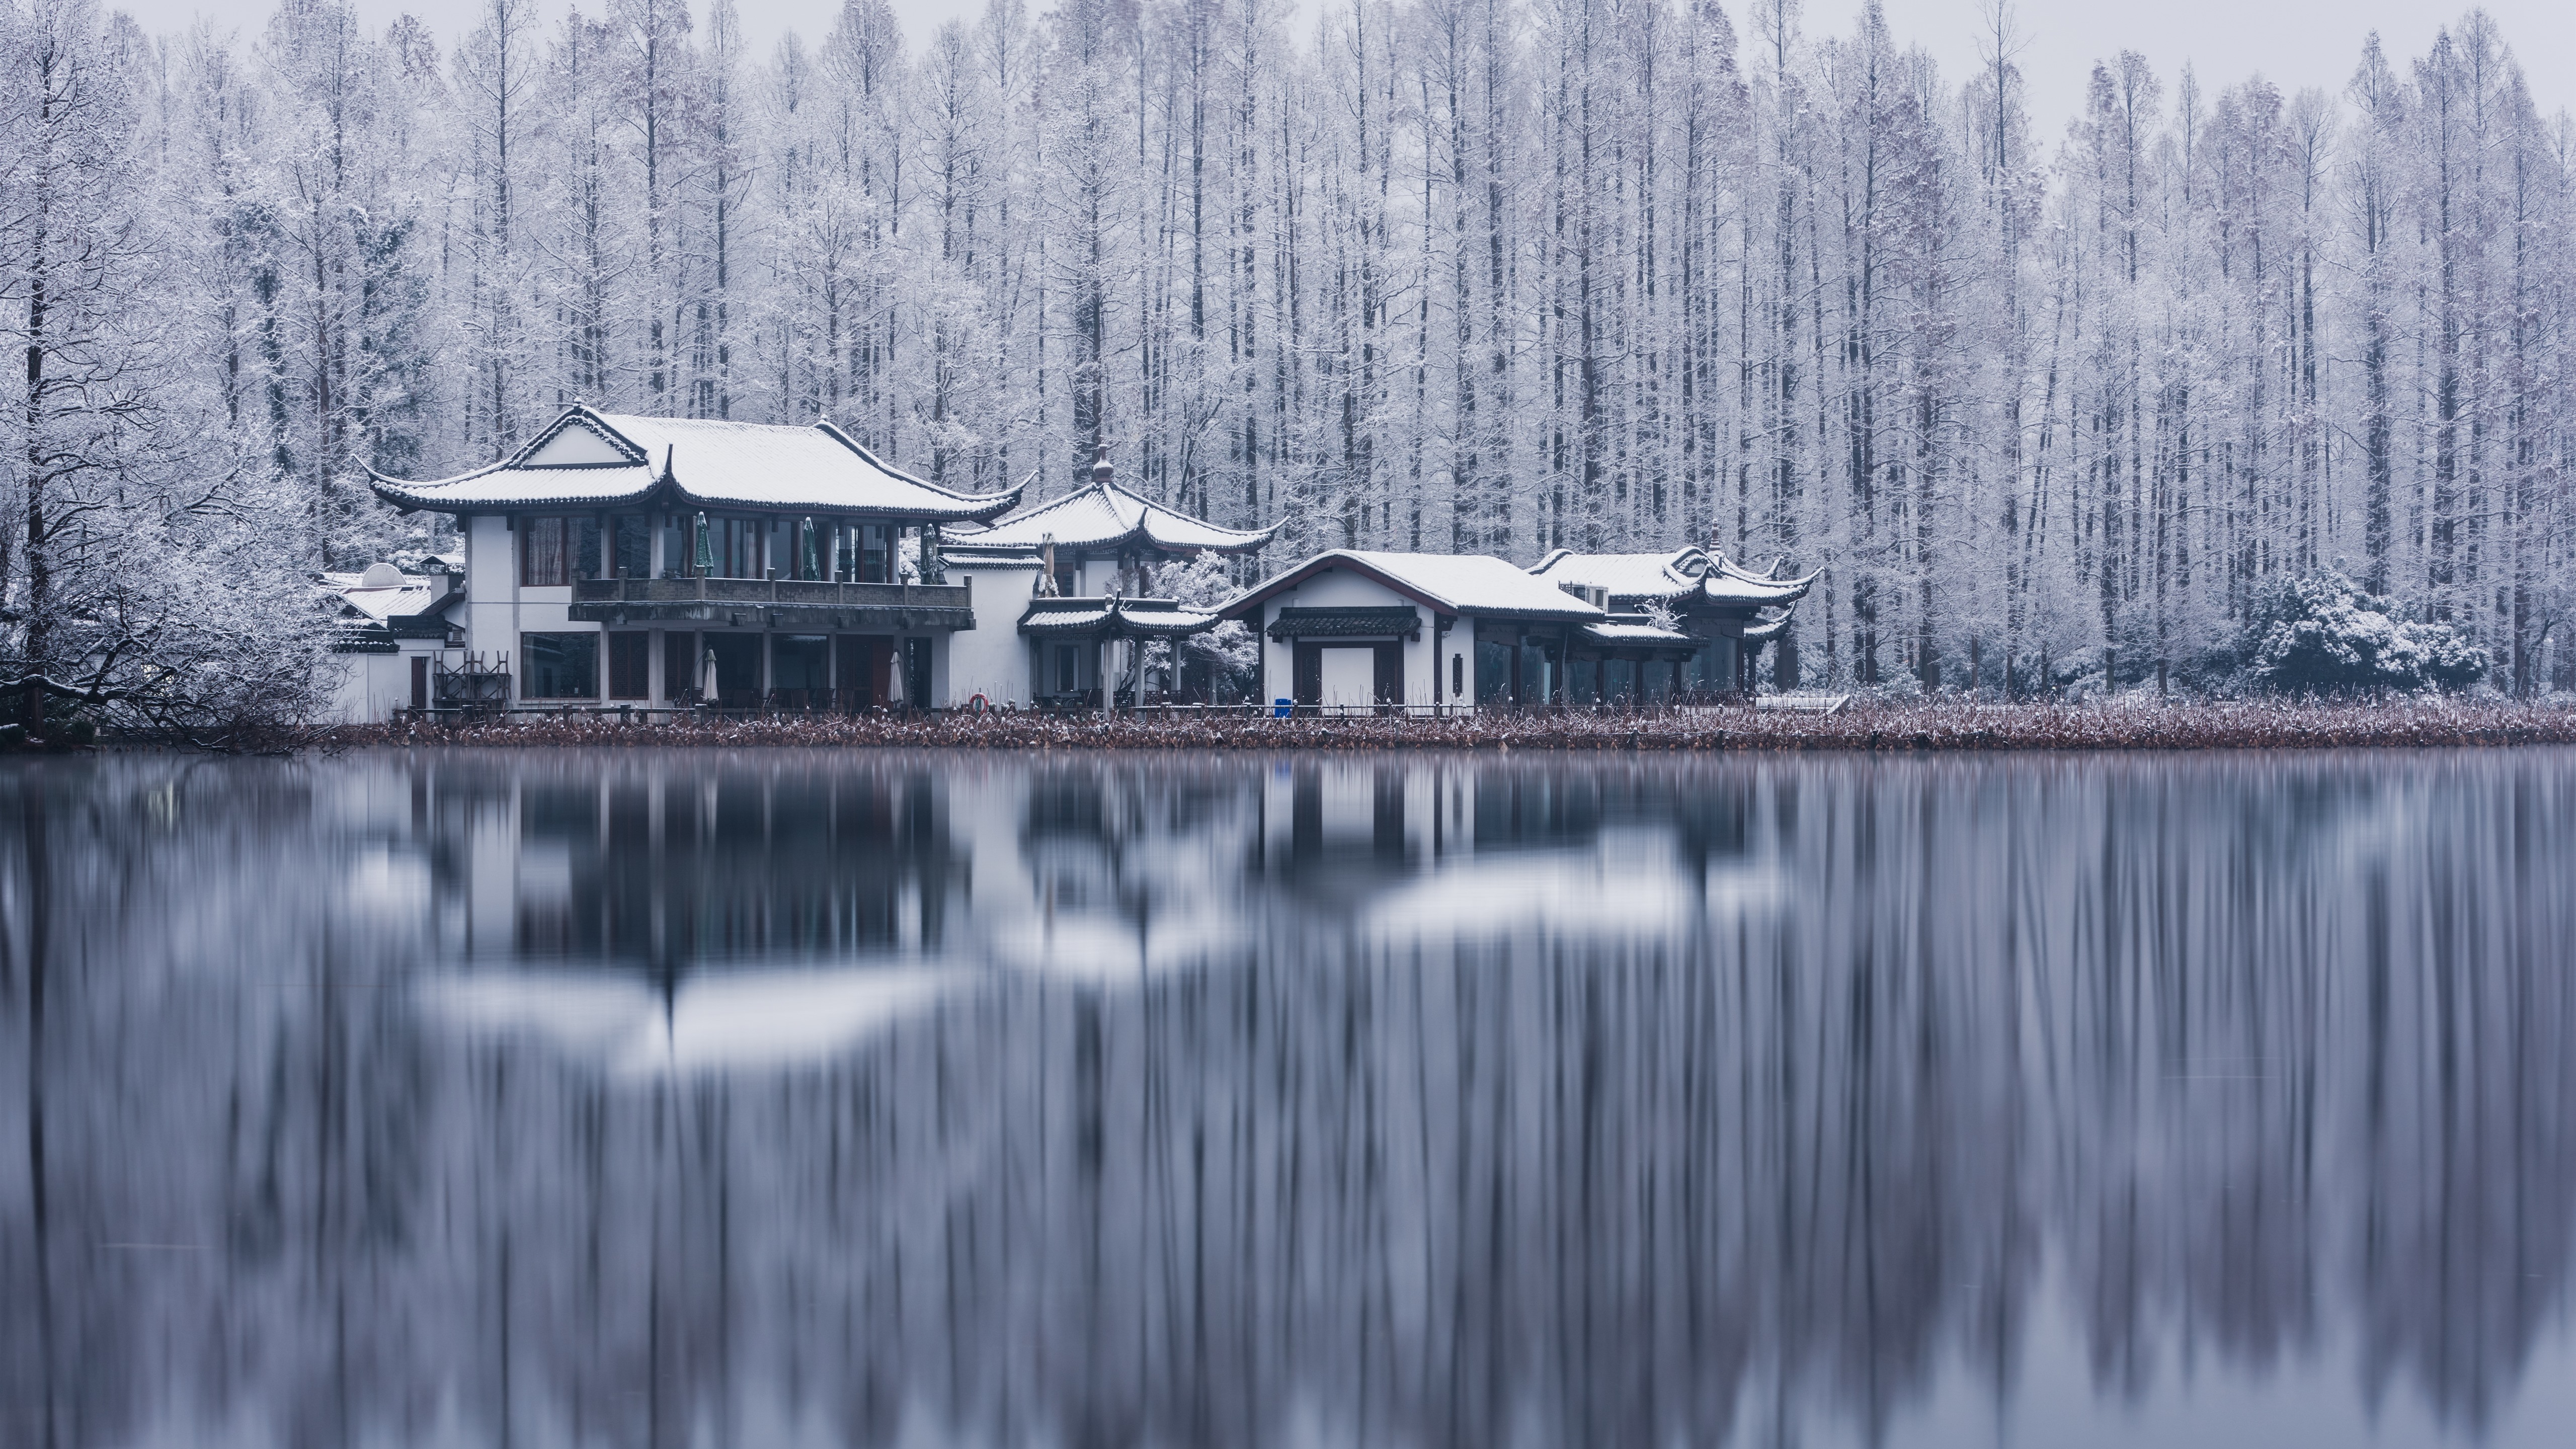 Wallpaper West Lake, Hangzhou, trees, buildings, snow, winter, China 5120x2880 UHD 5K Picture, Image